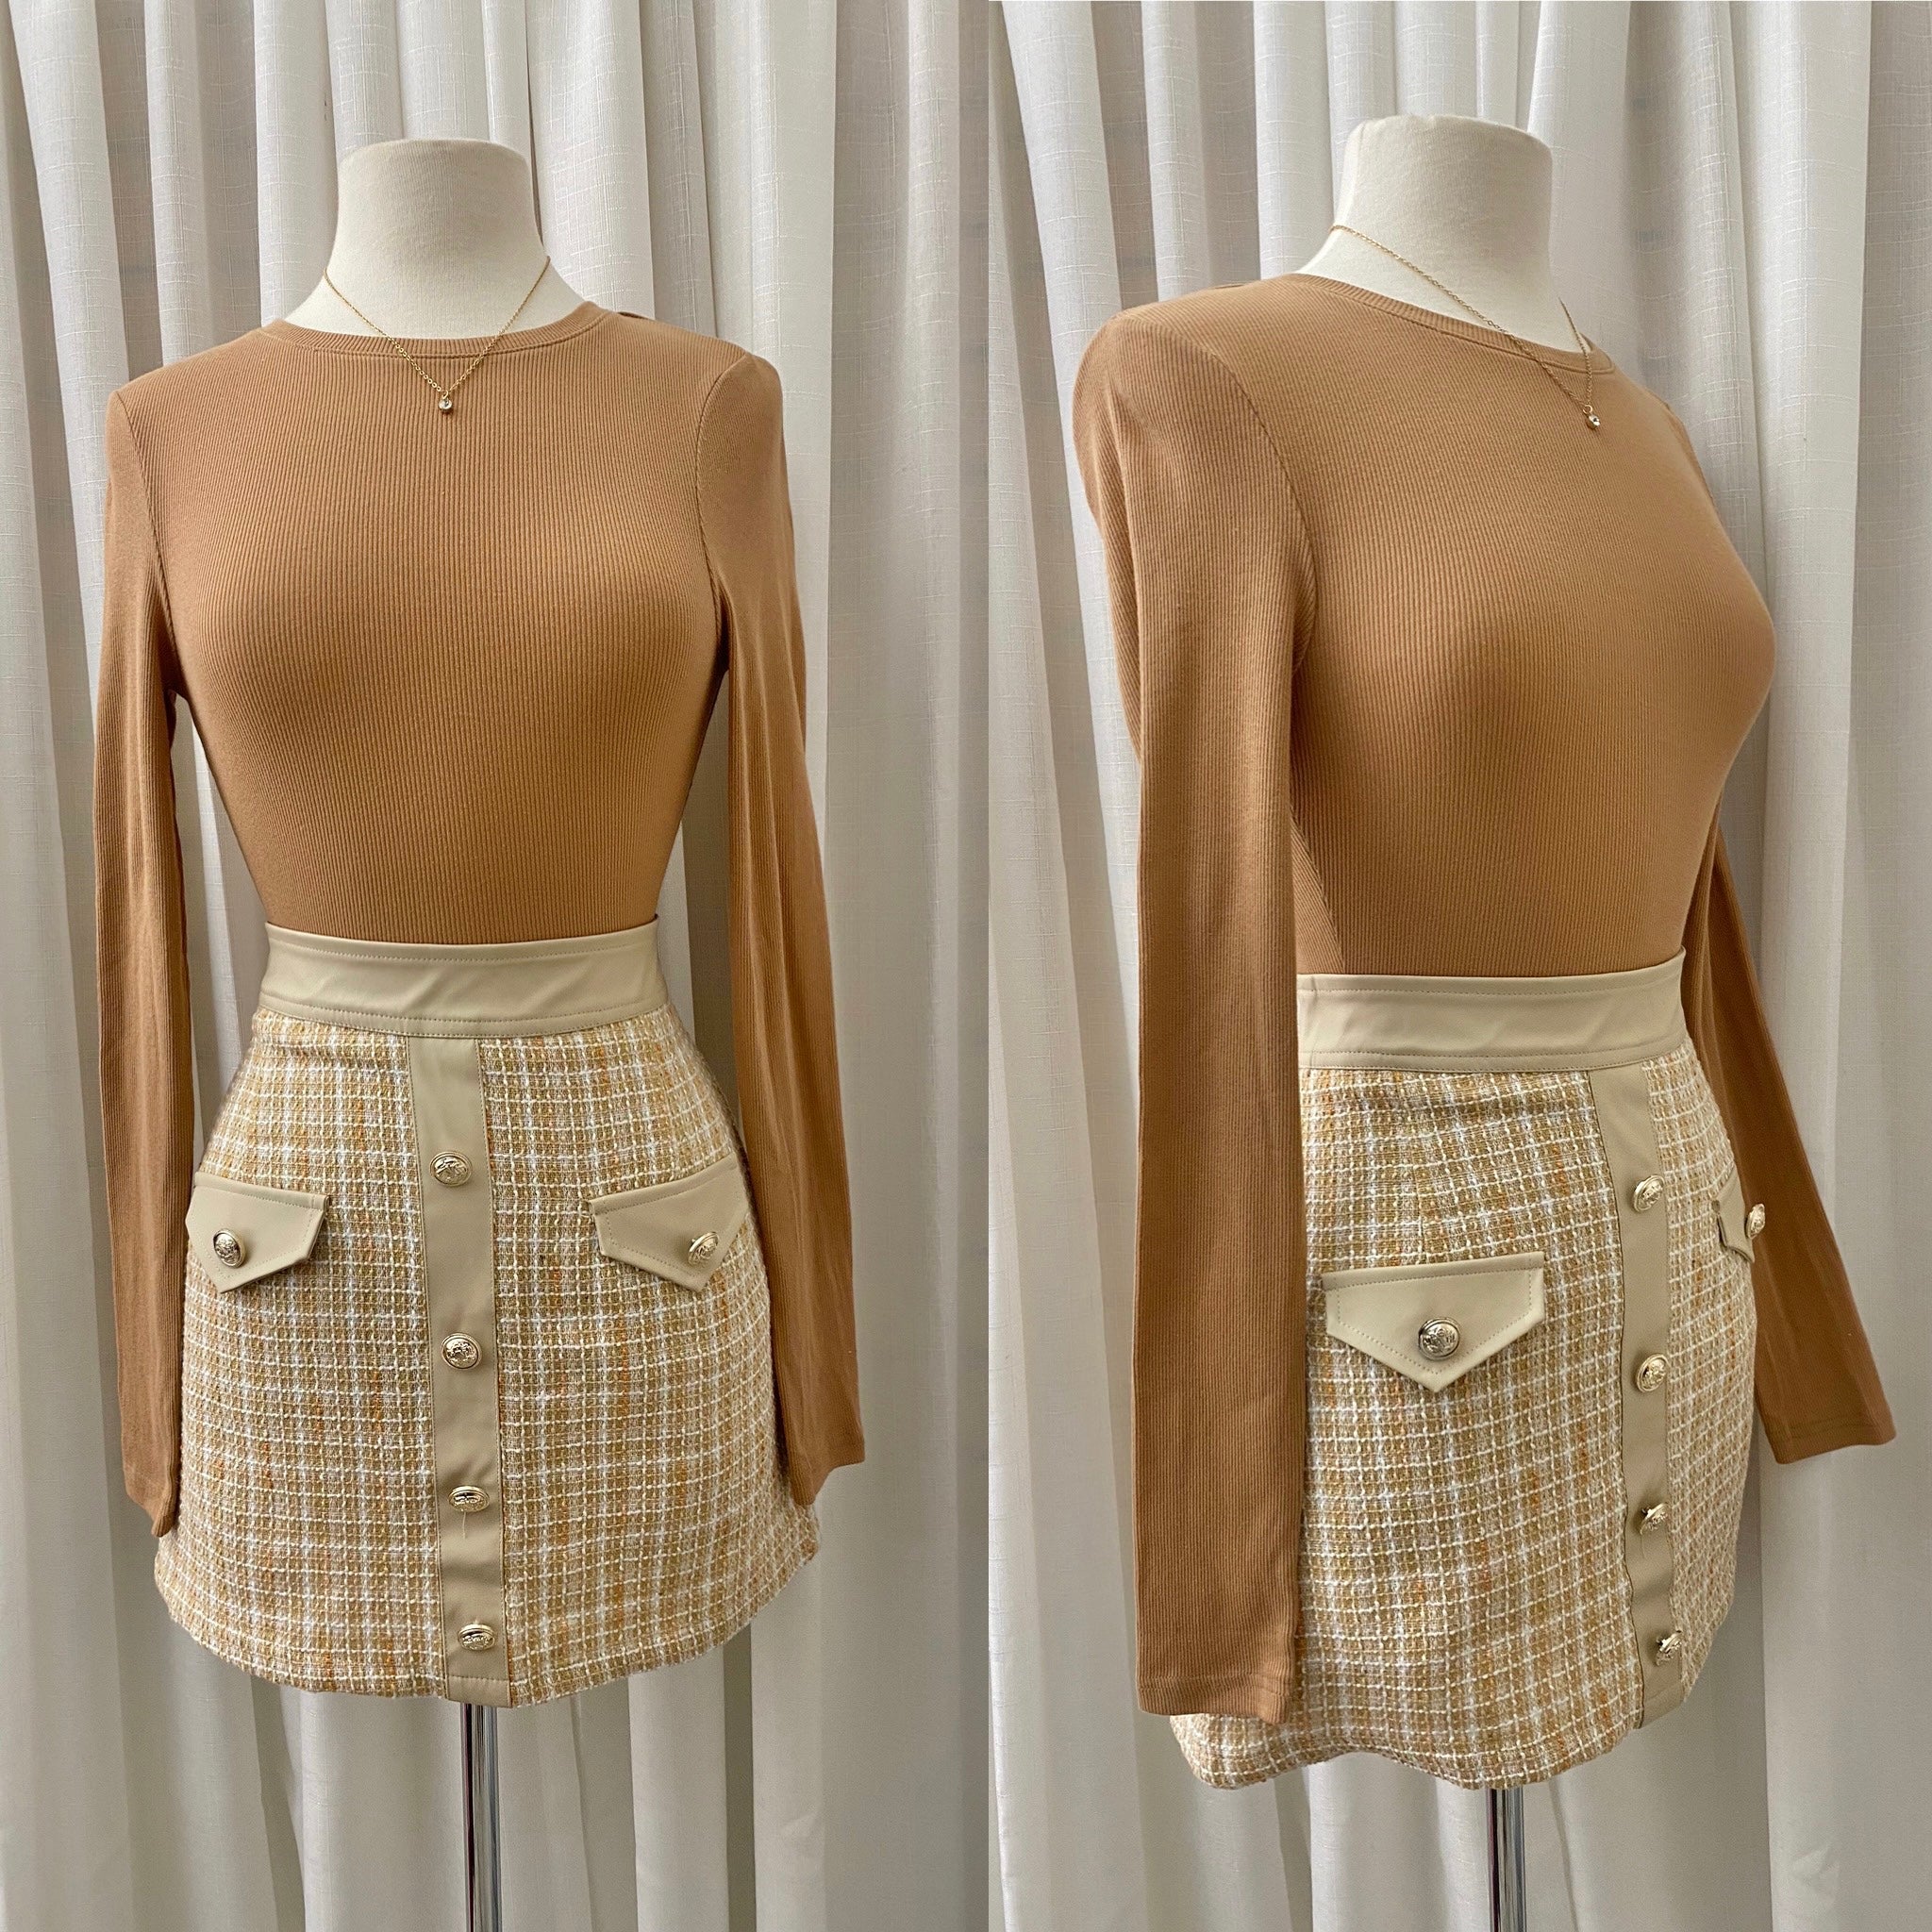 The “Preppy Babe” Tweed Skirt